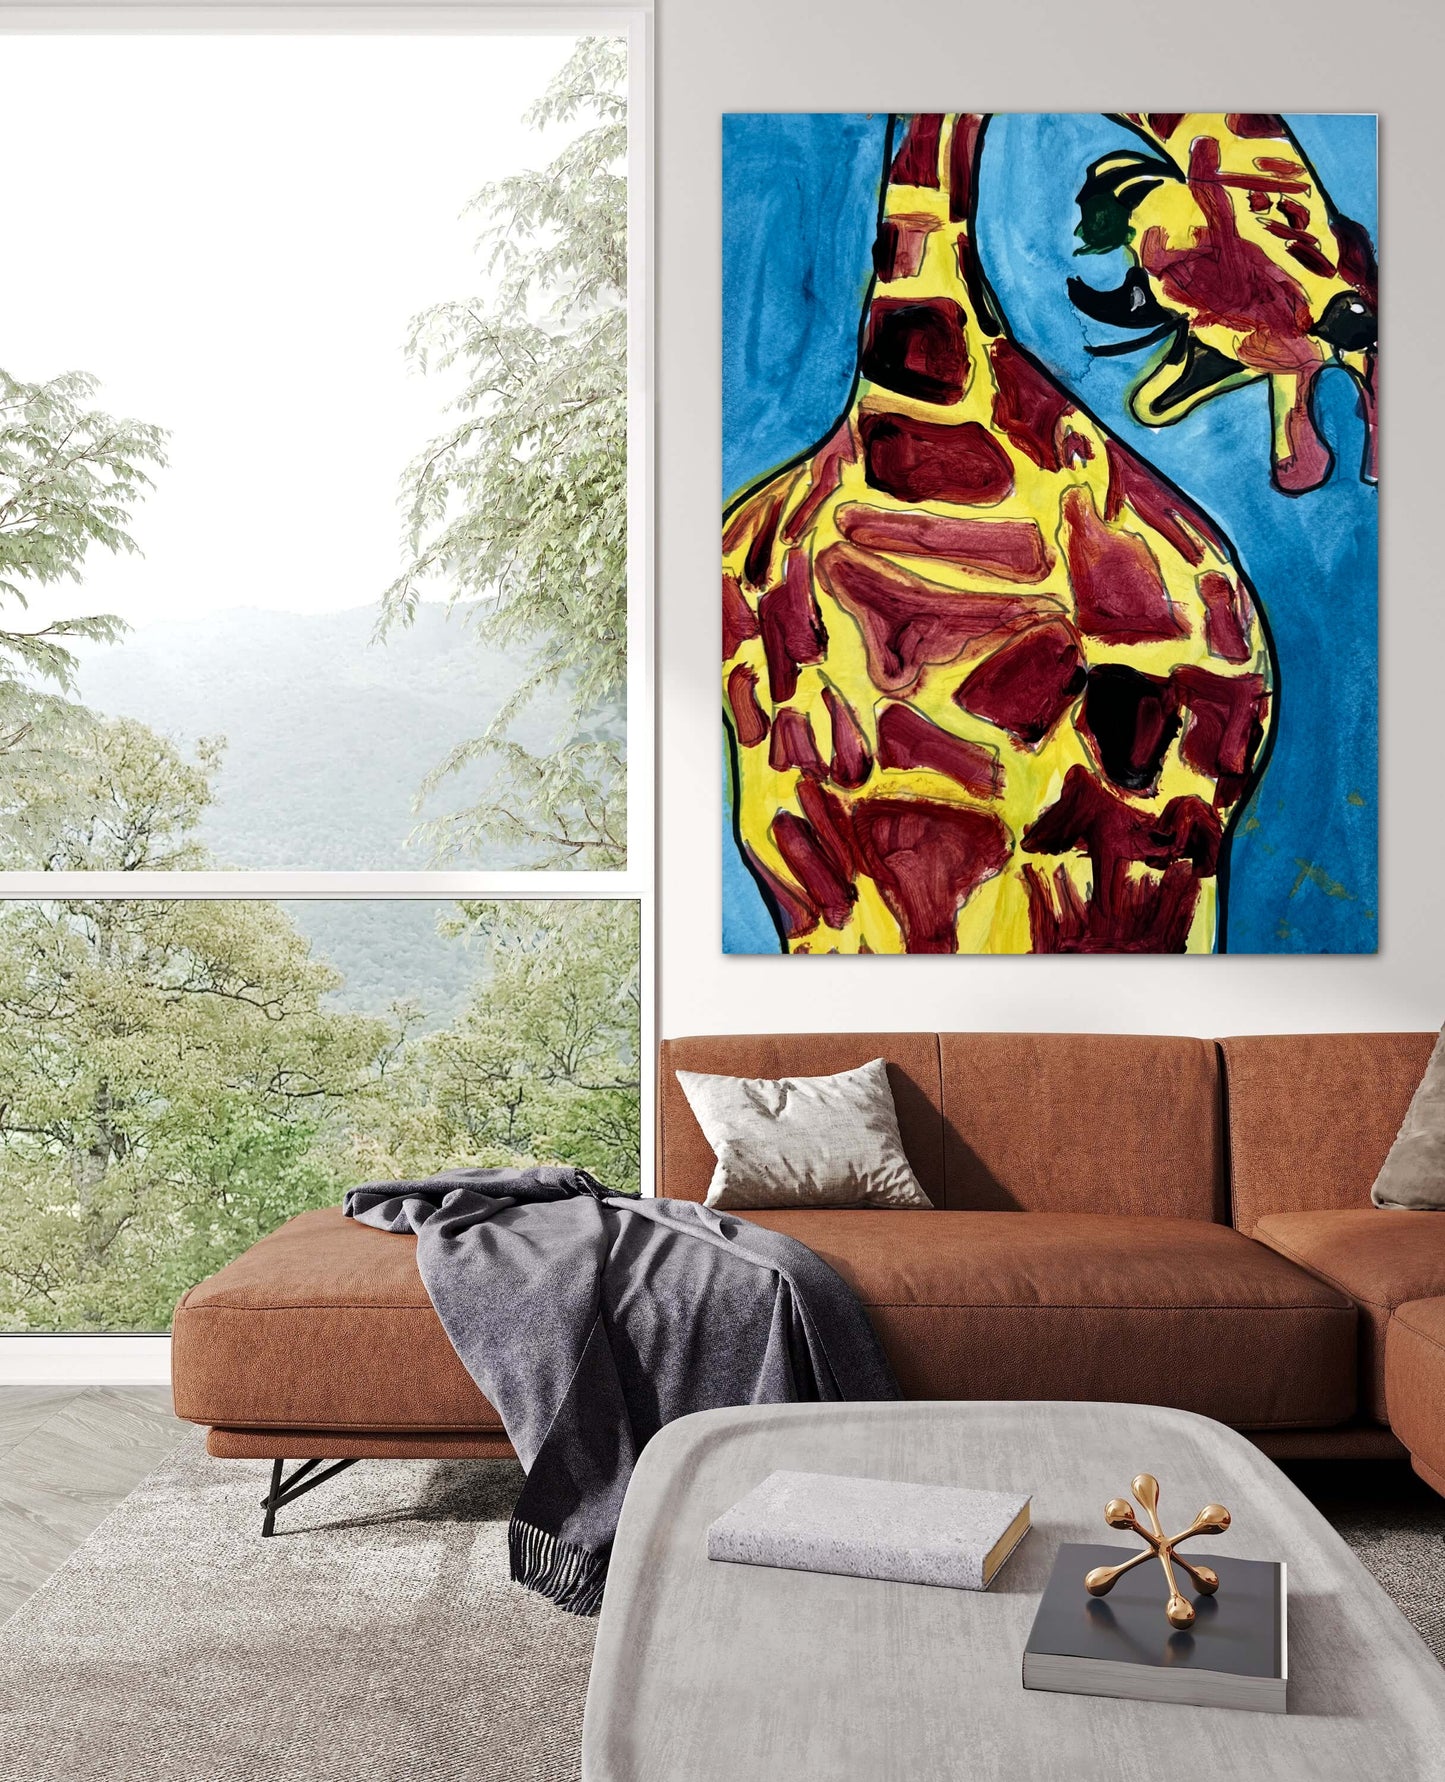 Upside Down Giraffe - Print, Poster or Stretched Canvas Print in more sizes